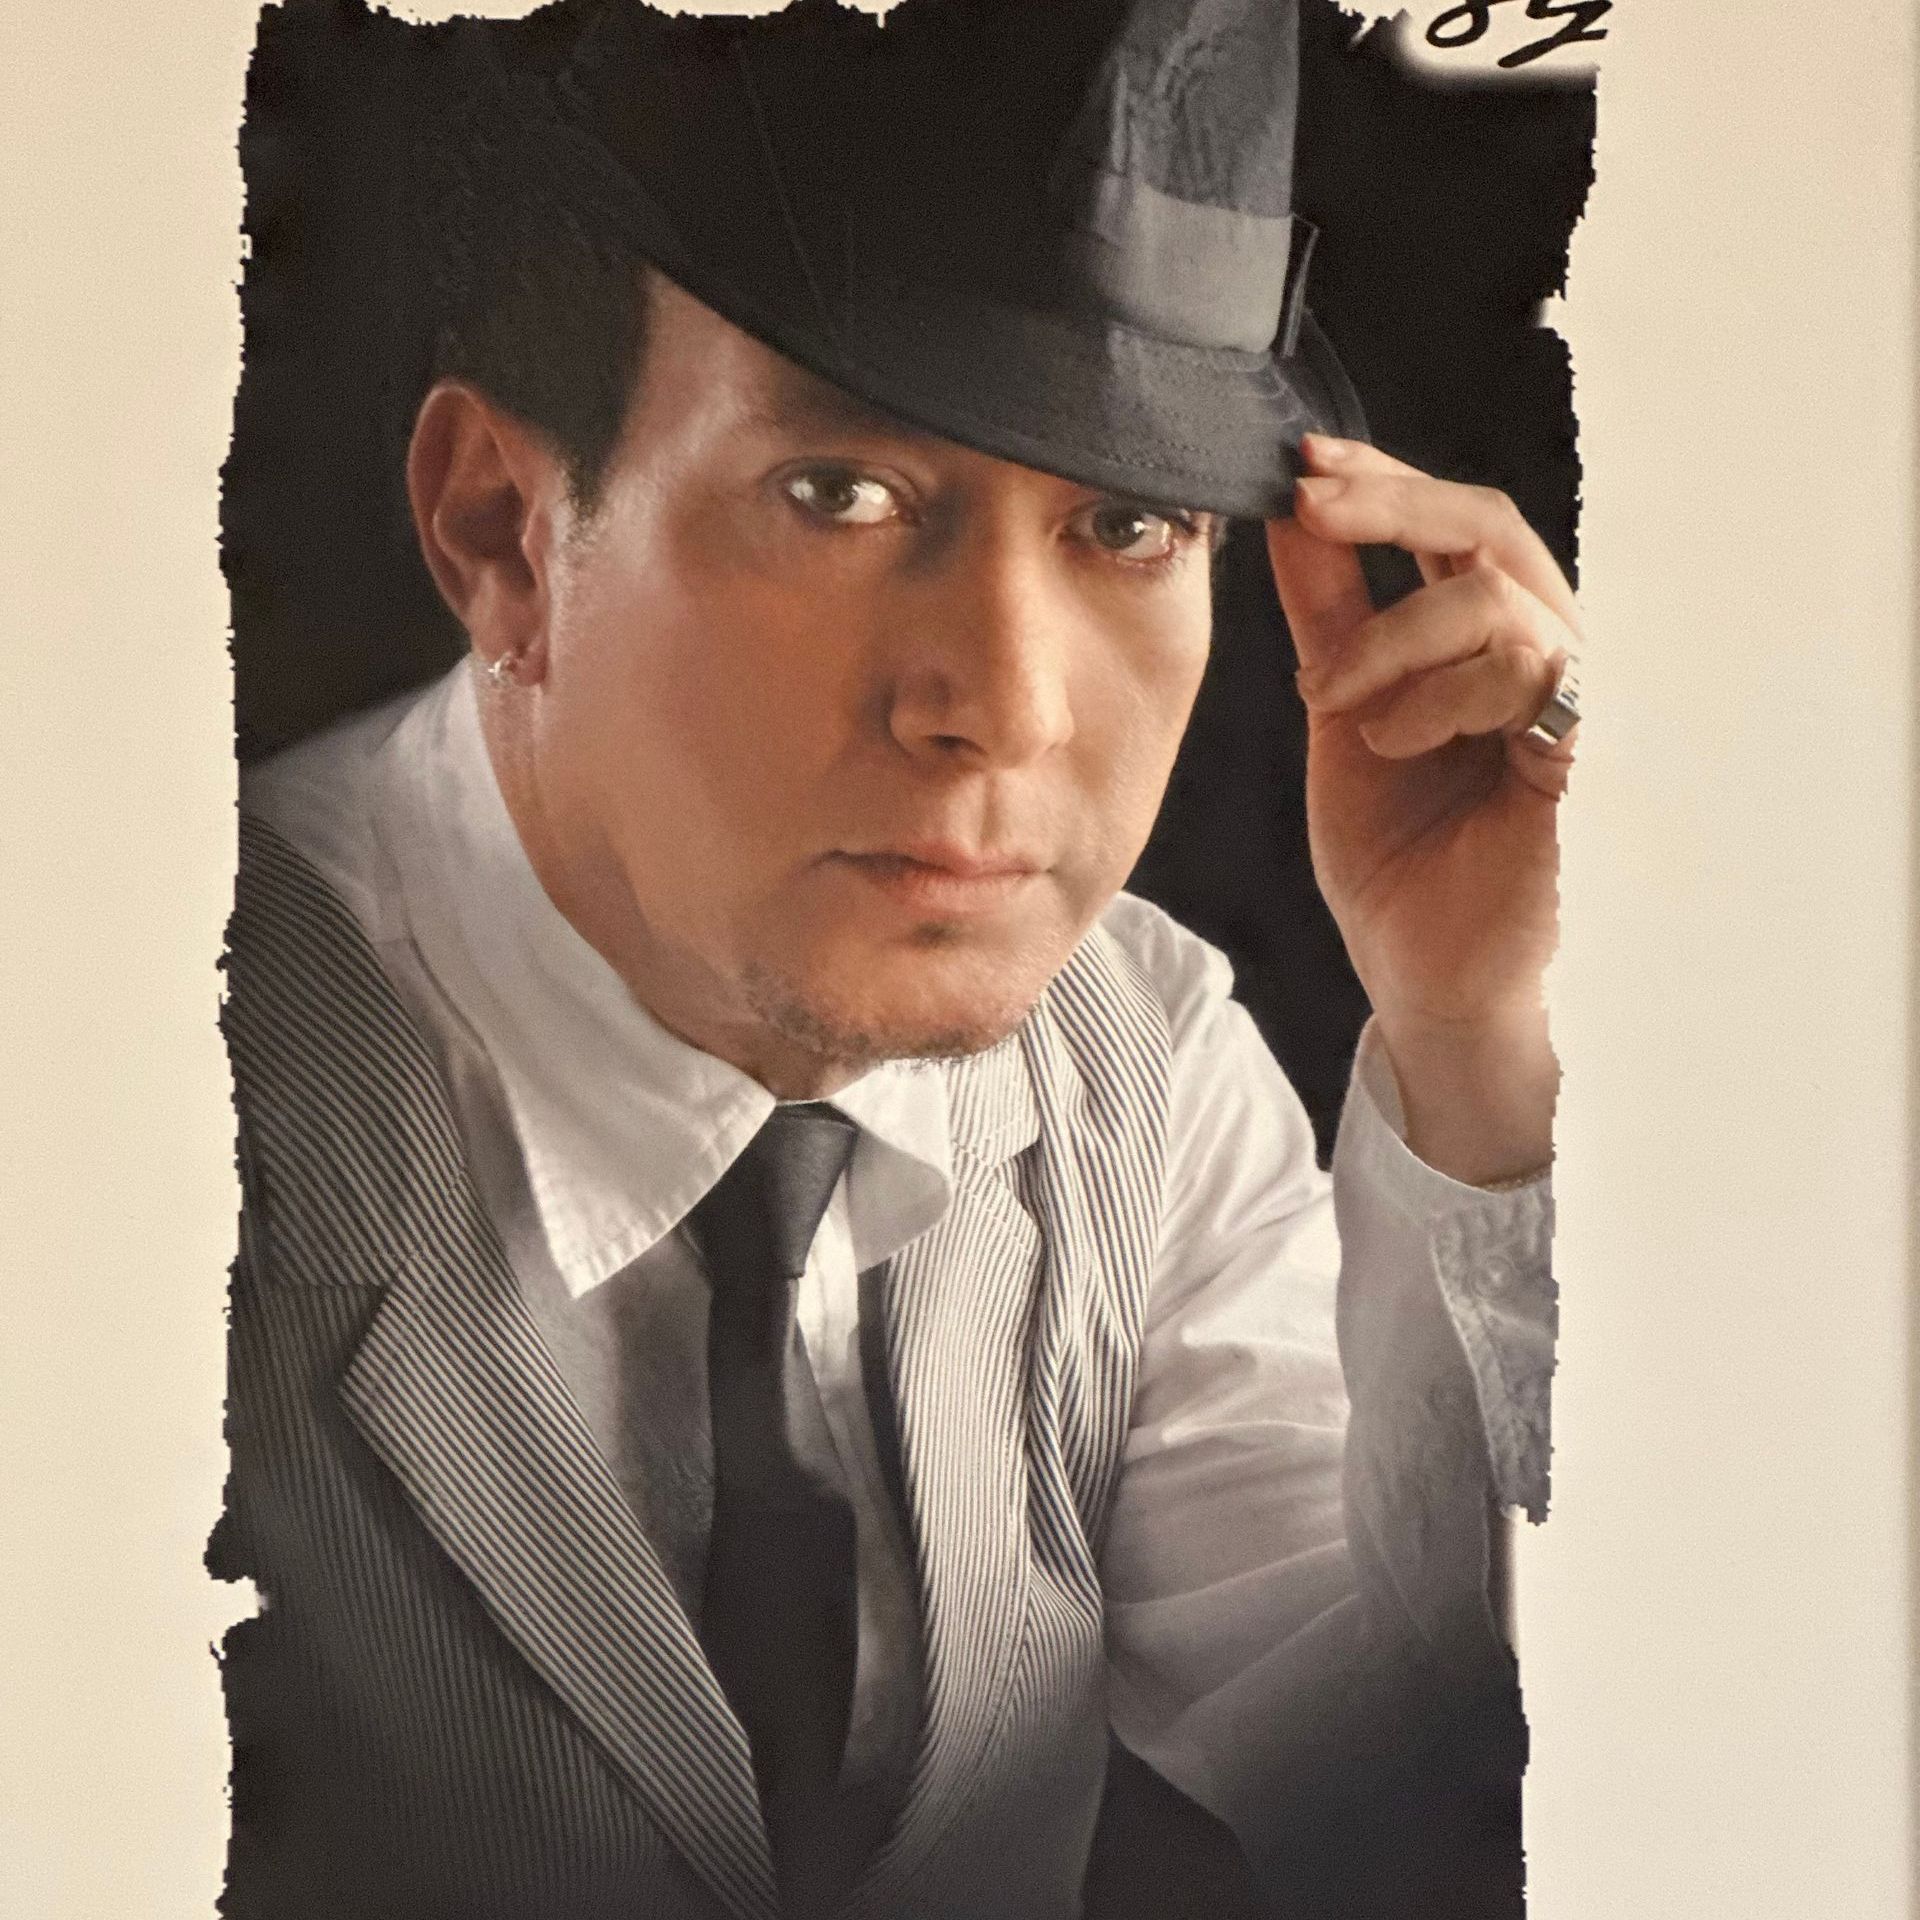 A man in a suit and tie adjusts his hat